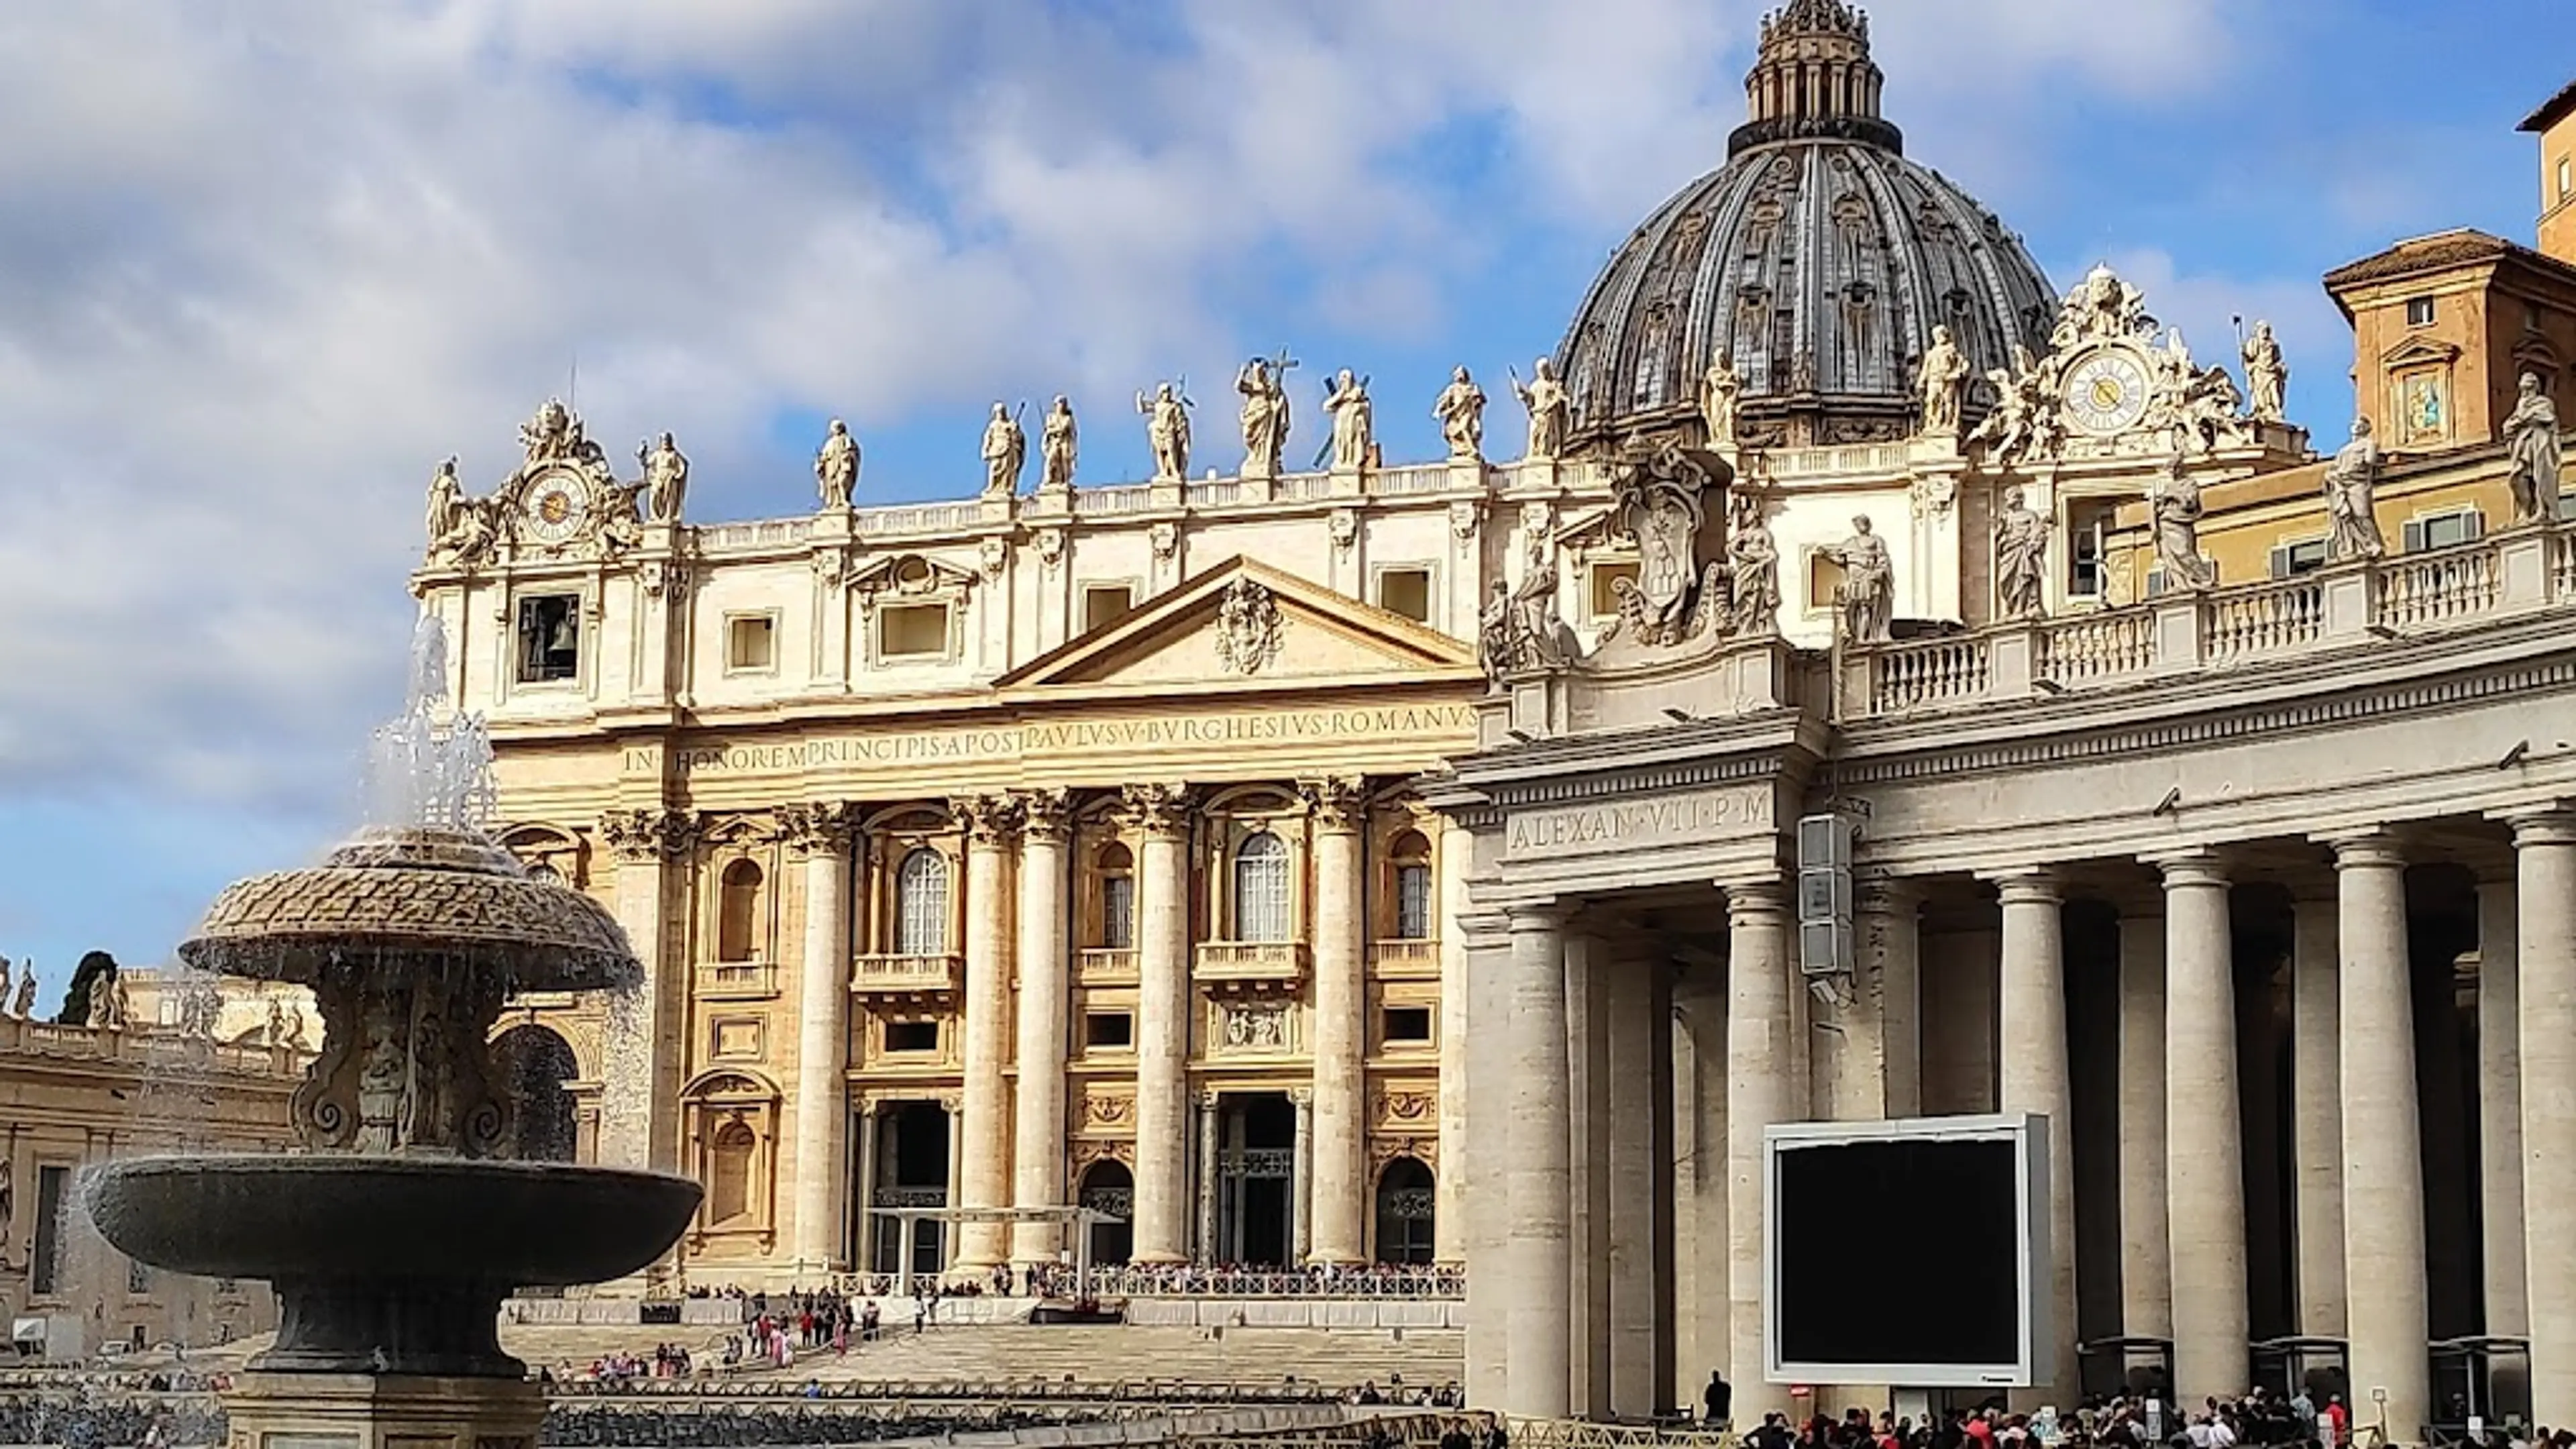 St. Peter's Basilica and Square